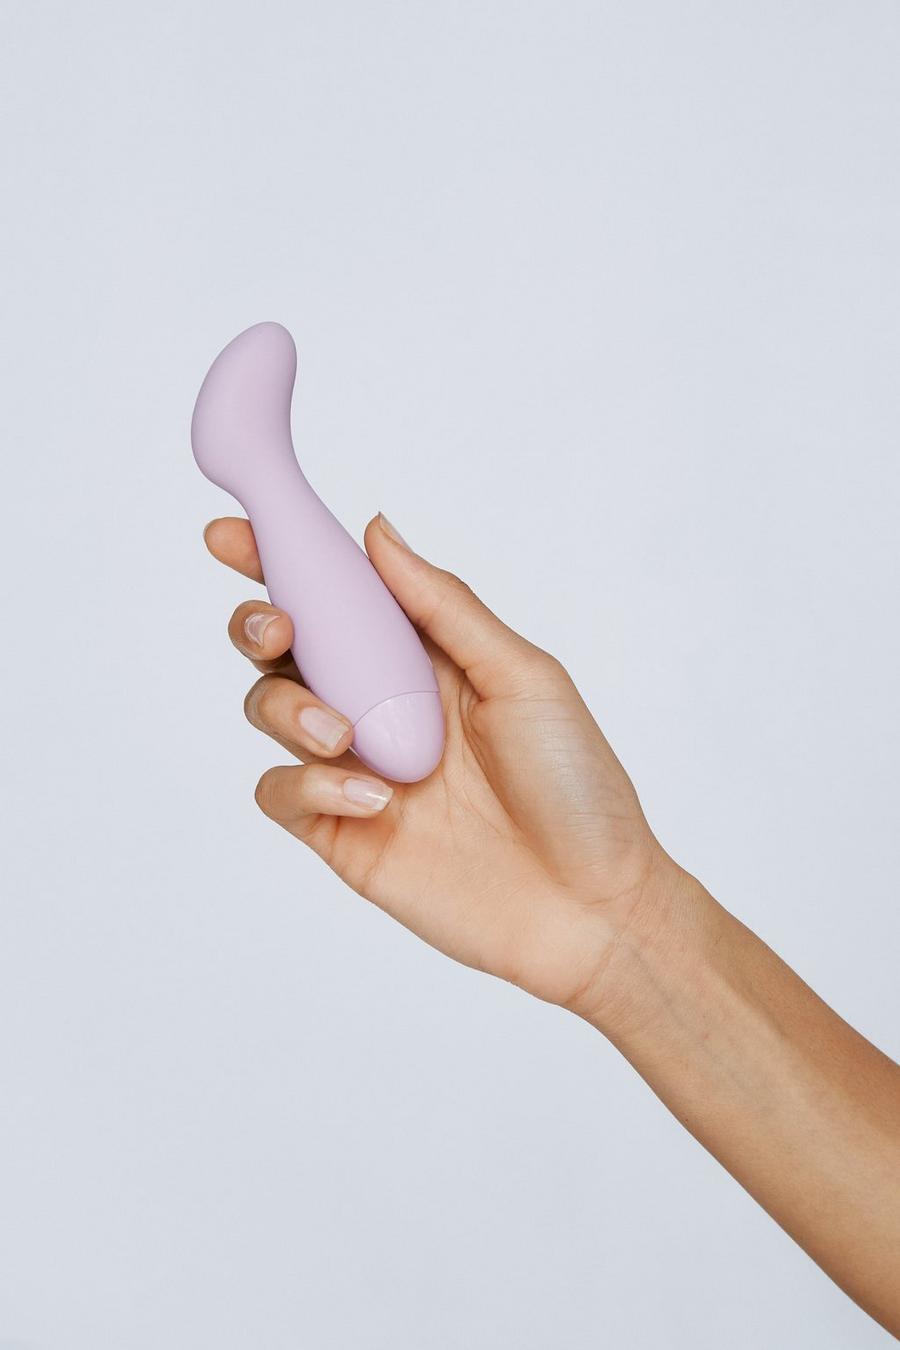 Lilac 10 Function Rechargeable G-spot Wand Vibrator Sex Toy